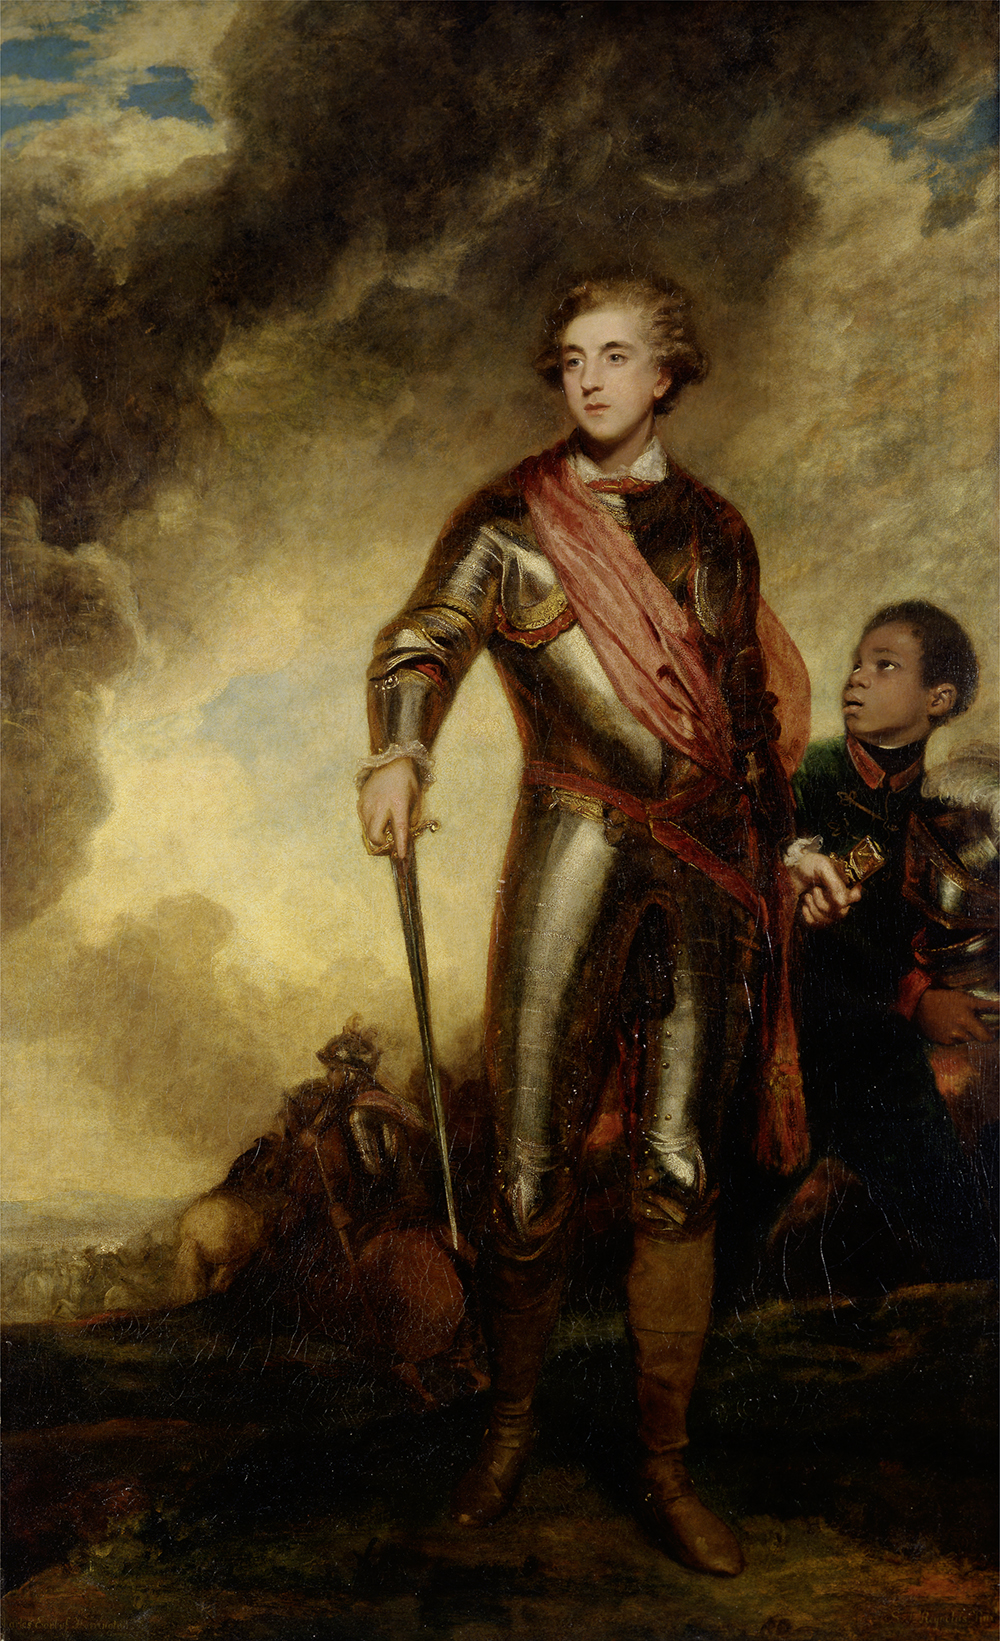 Charles Stanhope, Third Earl of Harrington, and a Servant, by Joshua Reynolds, 1782. Yale Center for British Art.